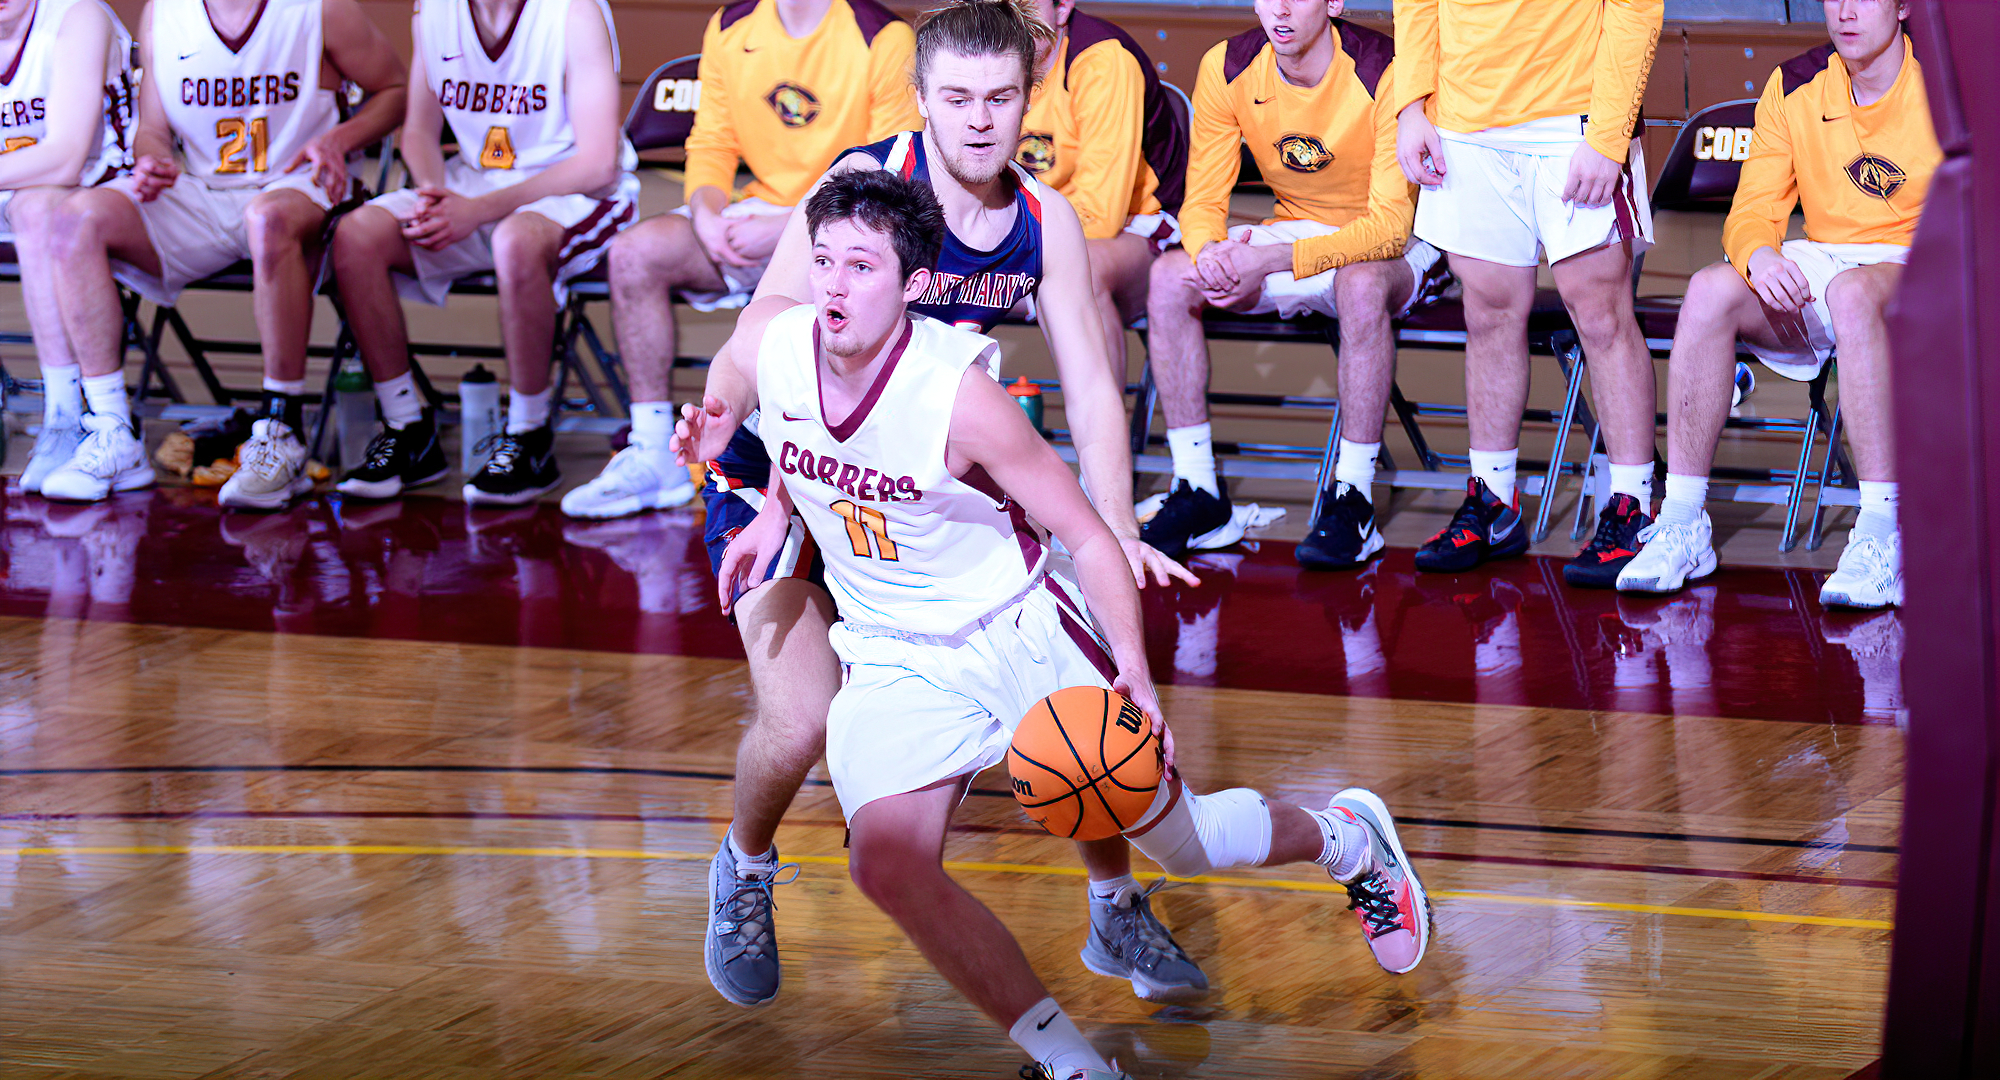 Braeton Motschenbacher dribbles by his defender on the baseline on his way to two of his game-high 22 points in the Cobbers' win over St. Mary's.